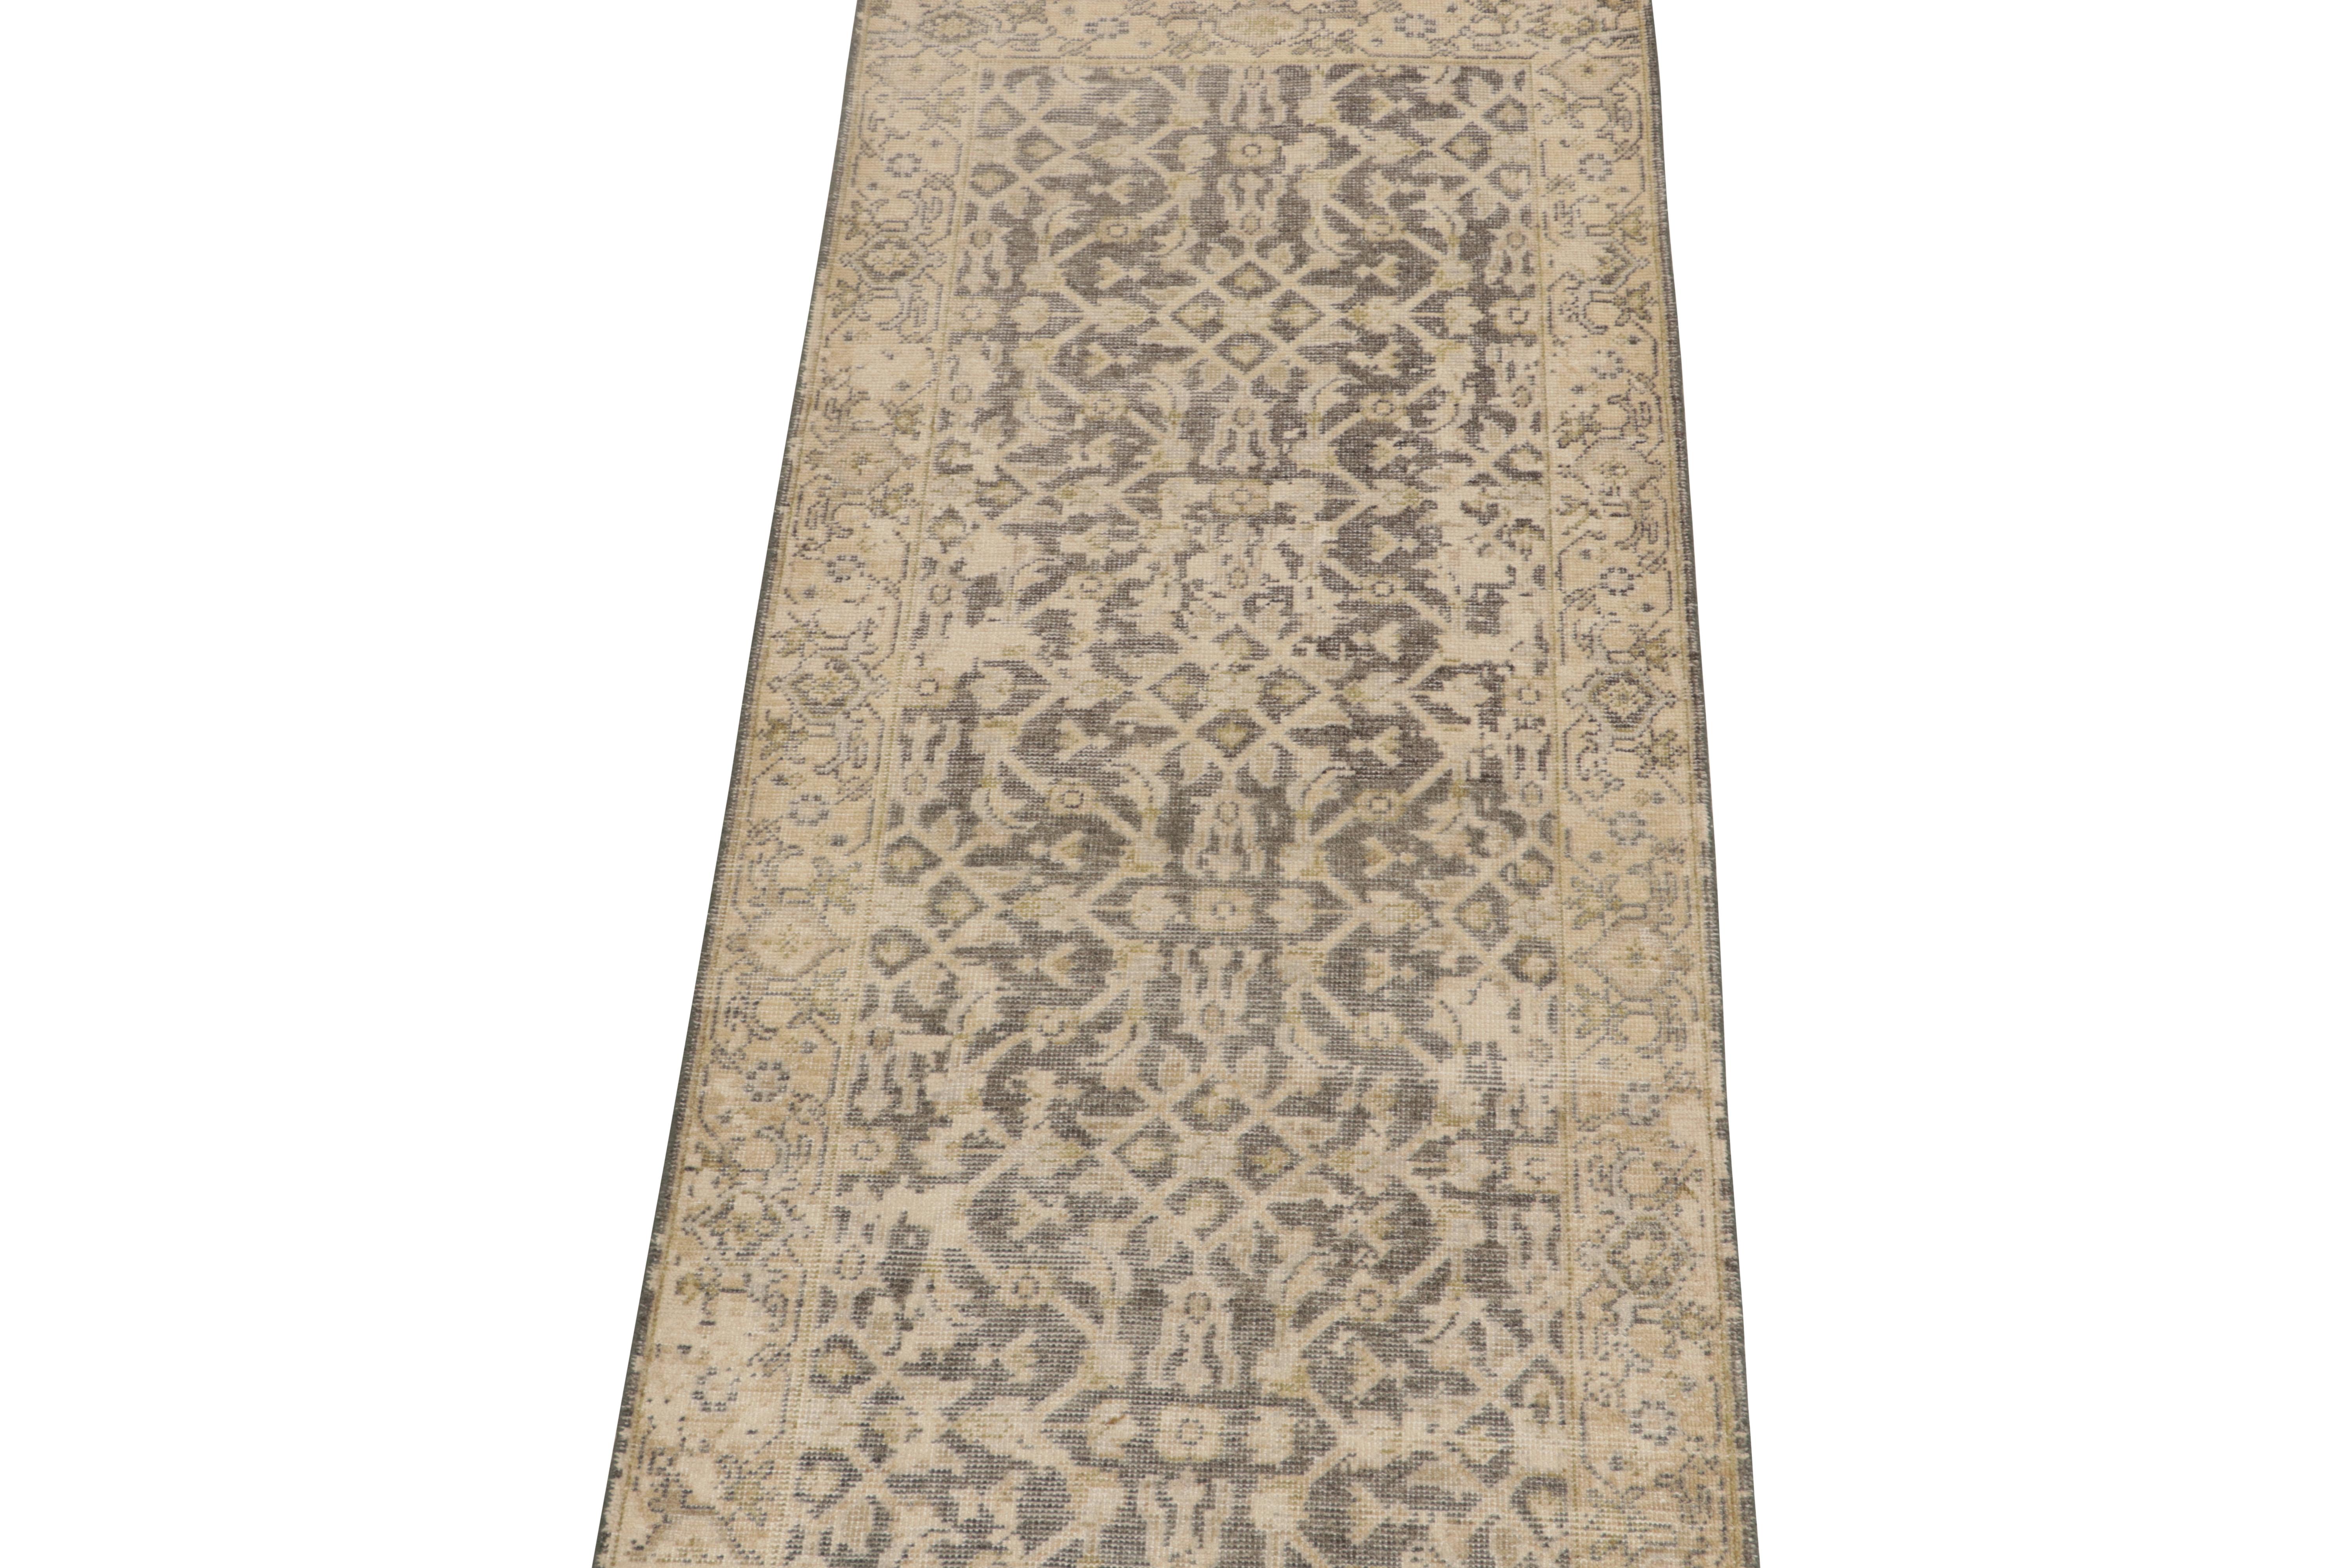 This 3x8 runner is a new addition to Rug & Kilim’s Homage Collection, and a nod to antique Persian rugs. Hand-knotted in wool and cotton, its elaborate pattern calls back to Herati patterns and recaptures their sensibility anew.
Further on the